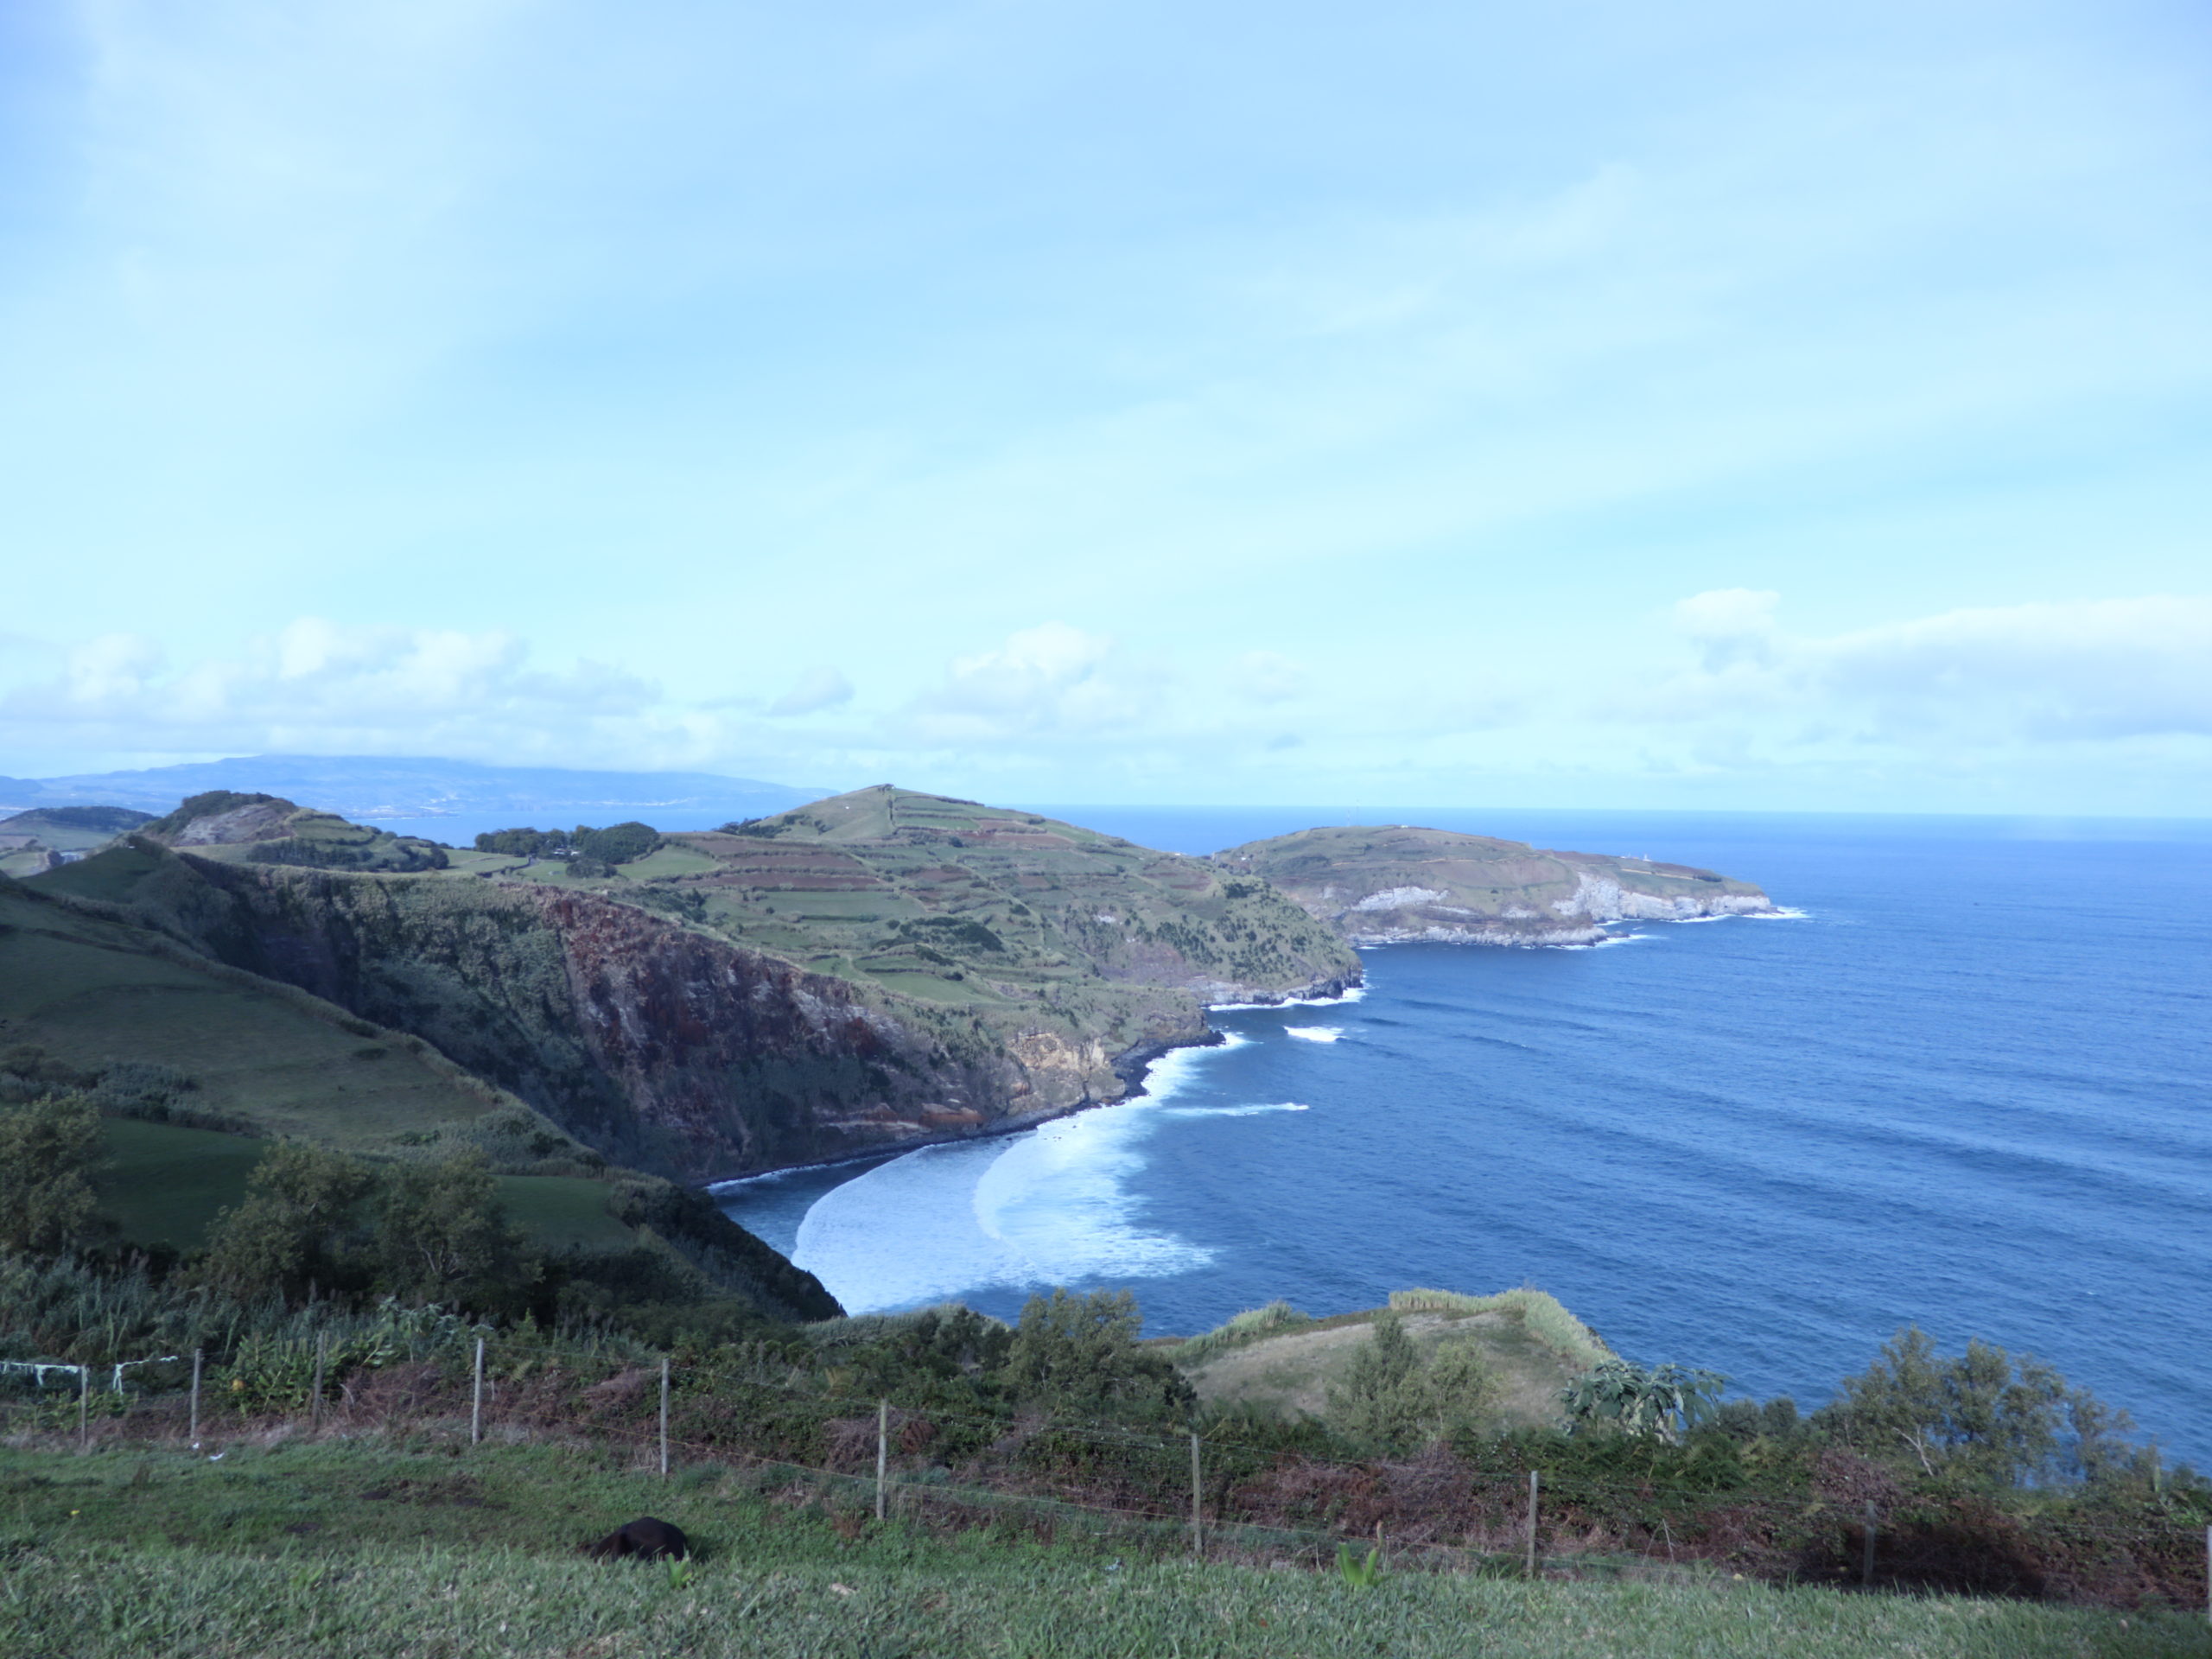 Looking out over the ocean from Sao Miguel island Azores 